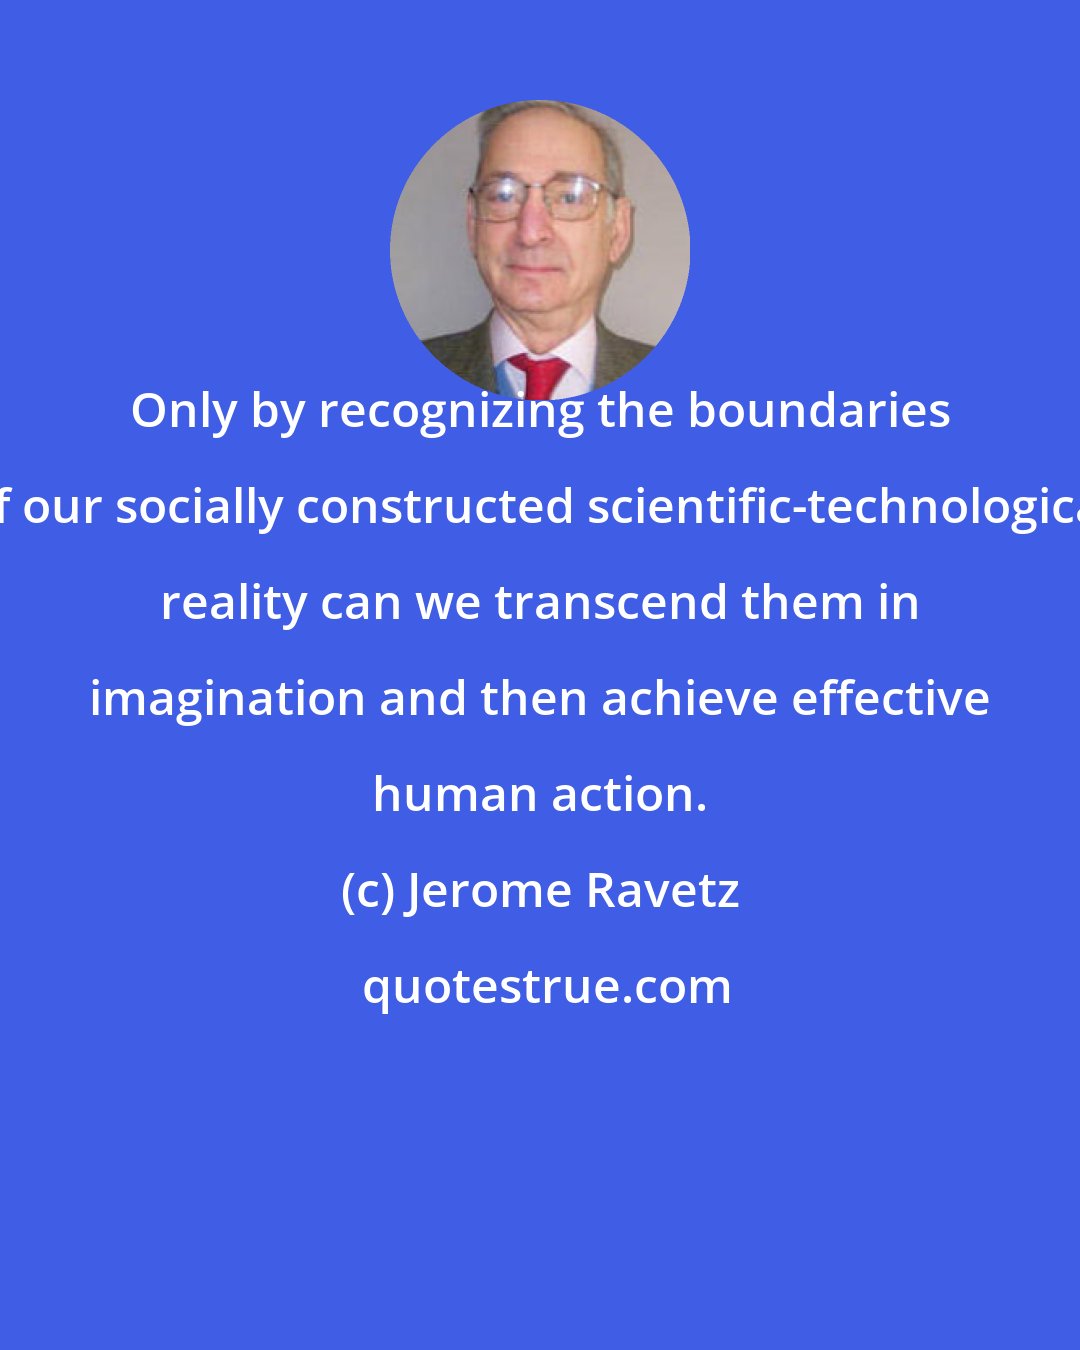 Jerome Ravetz: Only by recognizing the boundaries of our socially constructed scientific-technological reality can we transcend them in imagination and then achieve effective human action.